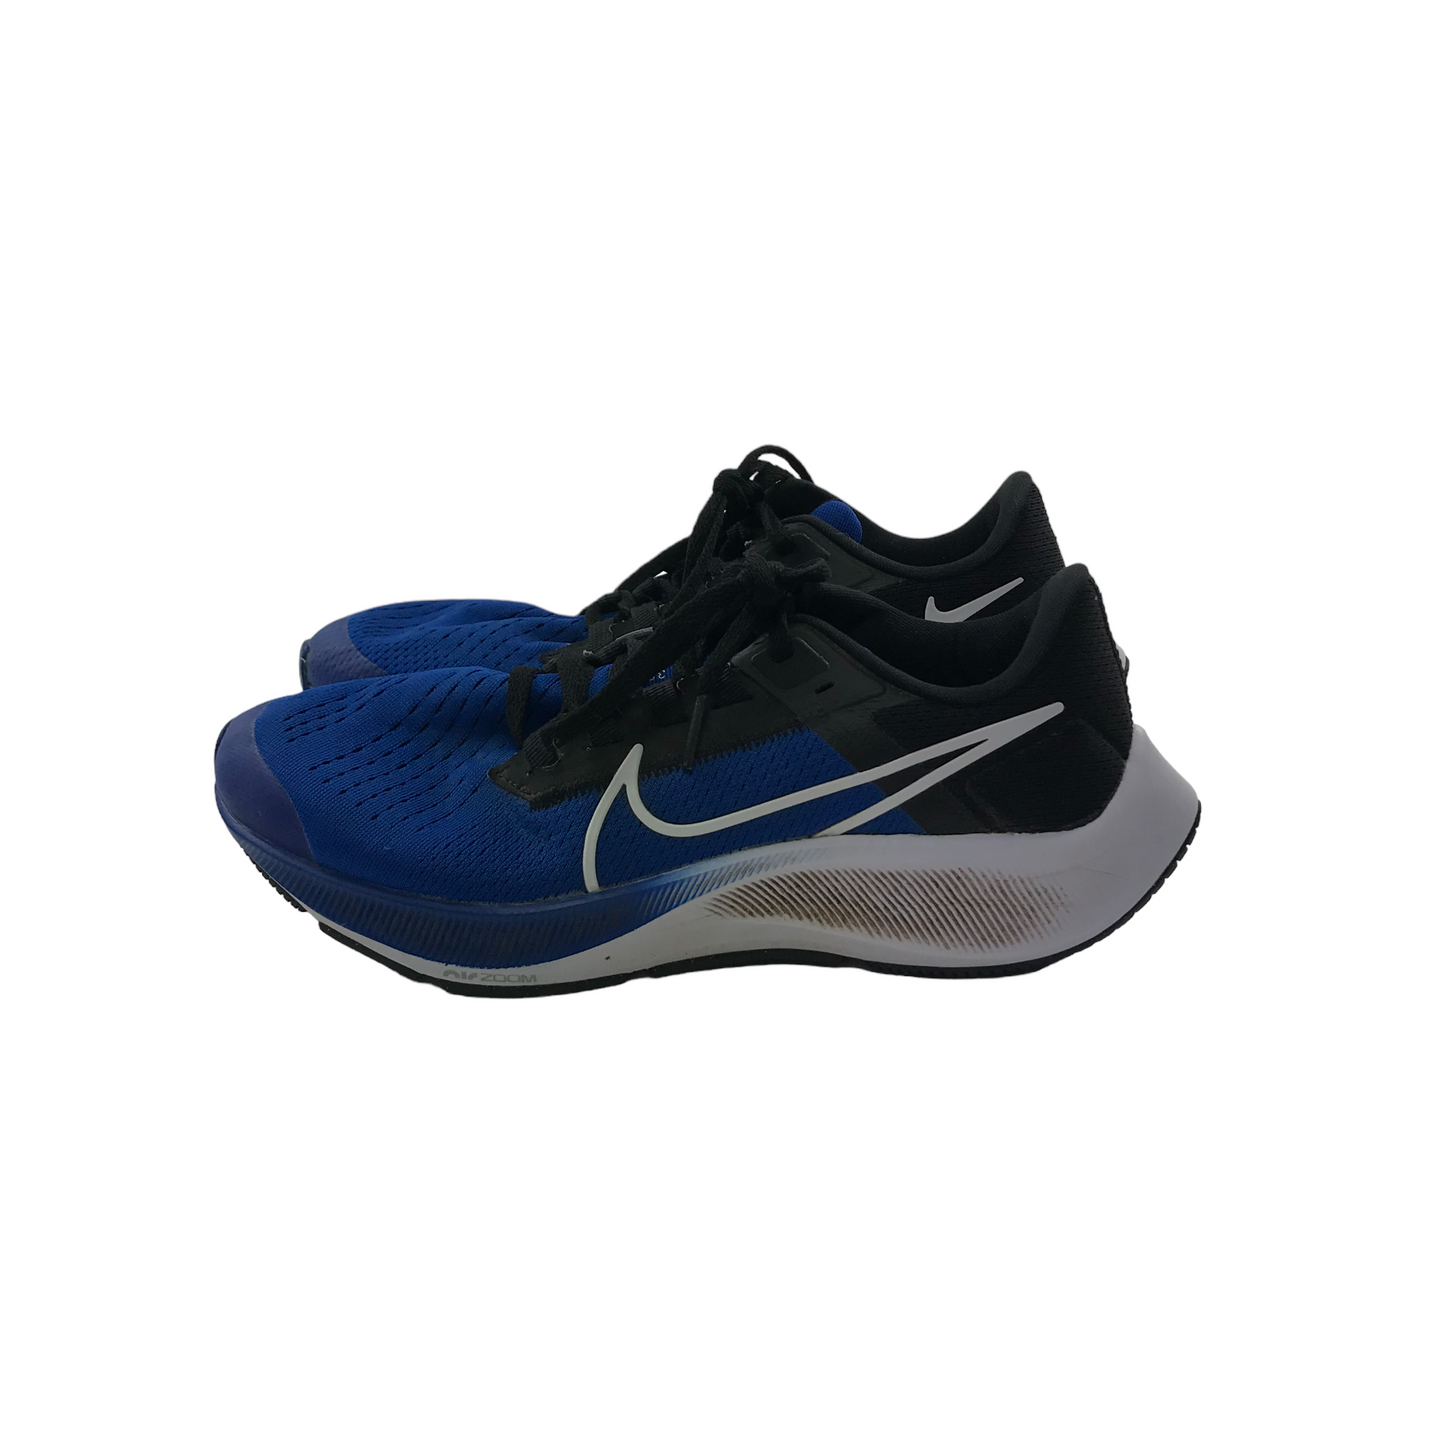 Nike Royal Blue Running Trainers Shoe Size 5.5